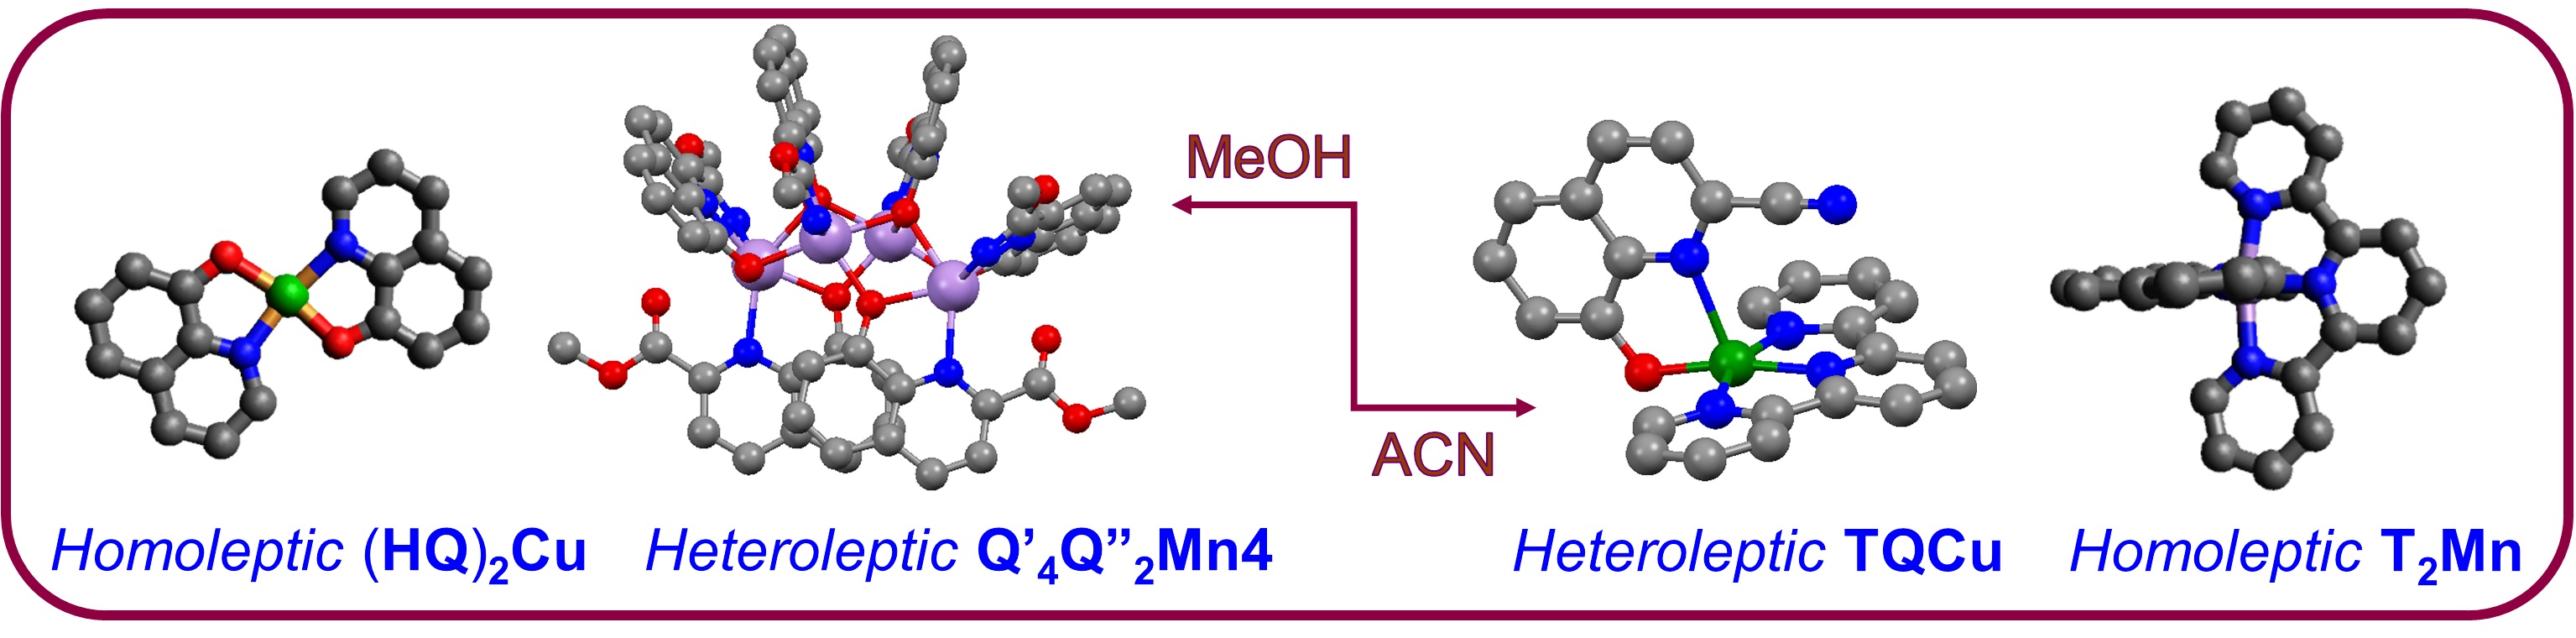 Heteroleptic complexes via solubility control: examples of Cu(II), Co(II), Ni(II) and Mn(II) complexes based on the derivatives of terpyridine and hydroxyquinoline